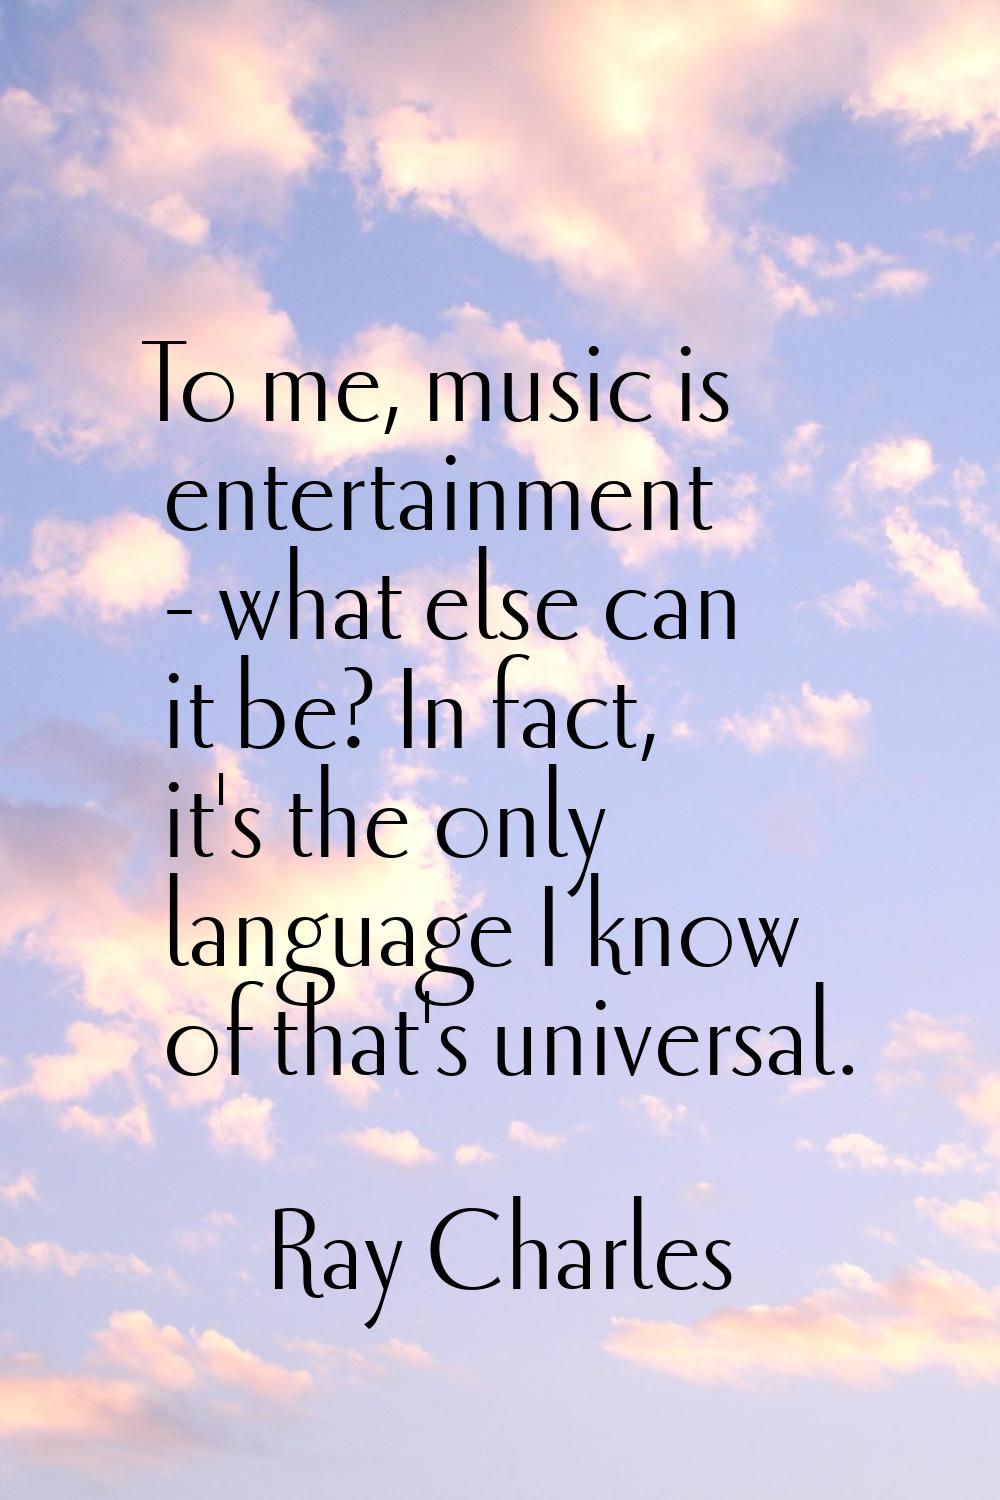 To me, music is entertainment - what else can it be? In fact, it's the only language I know of that